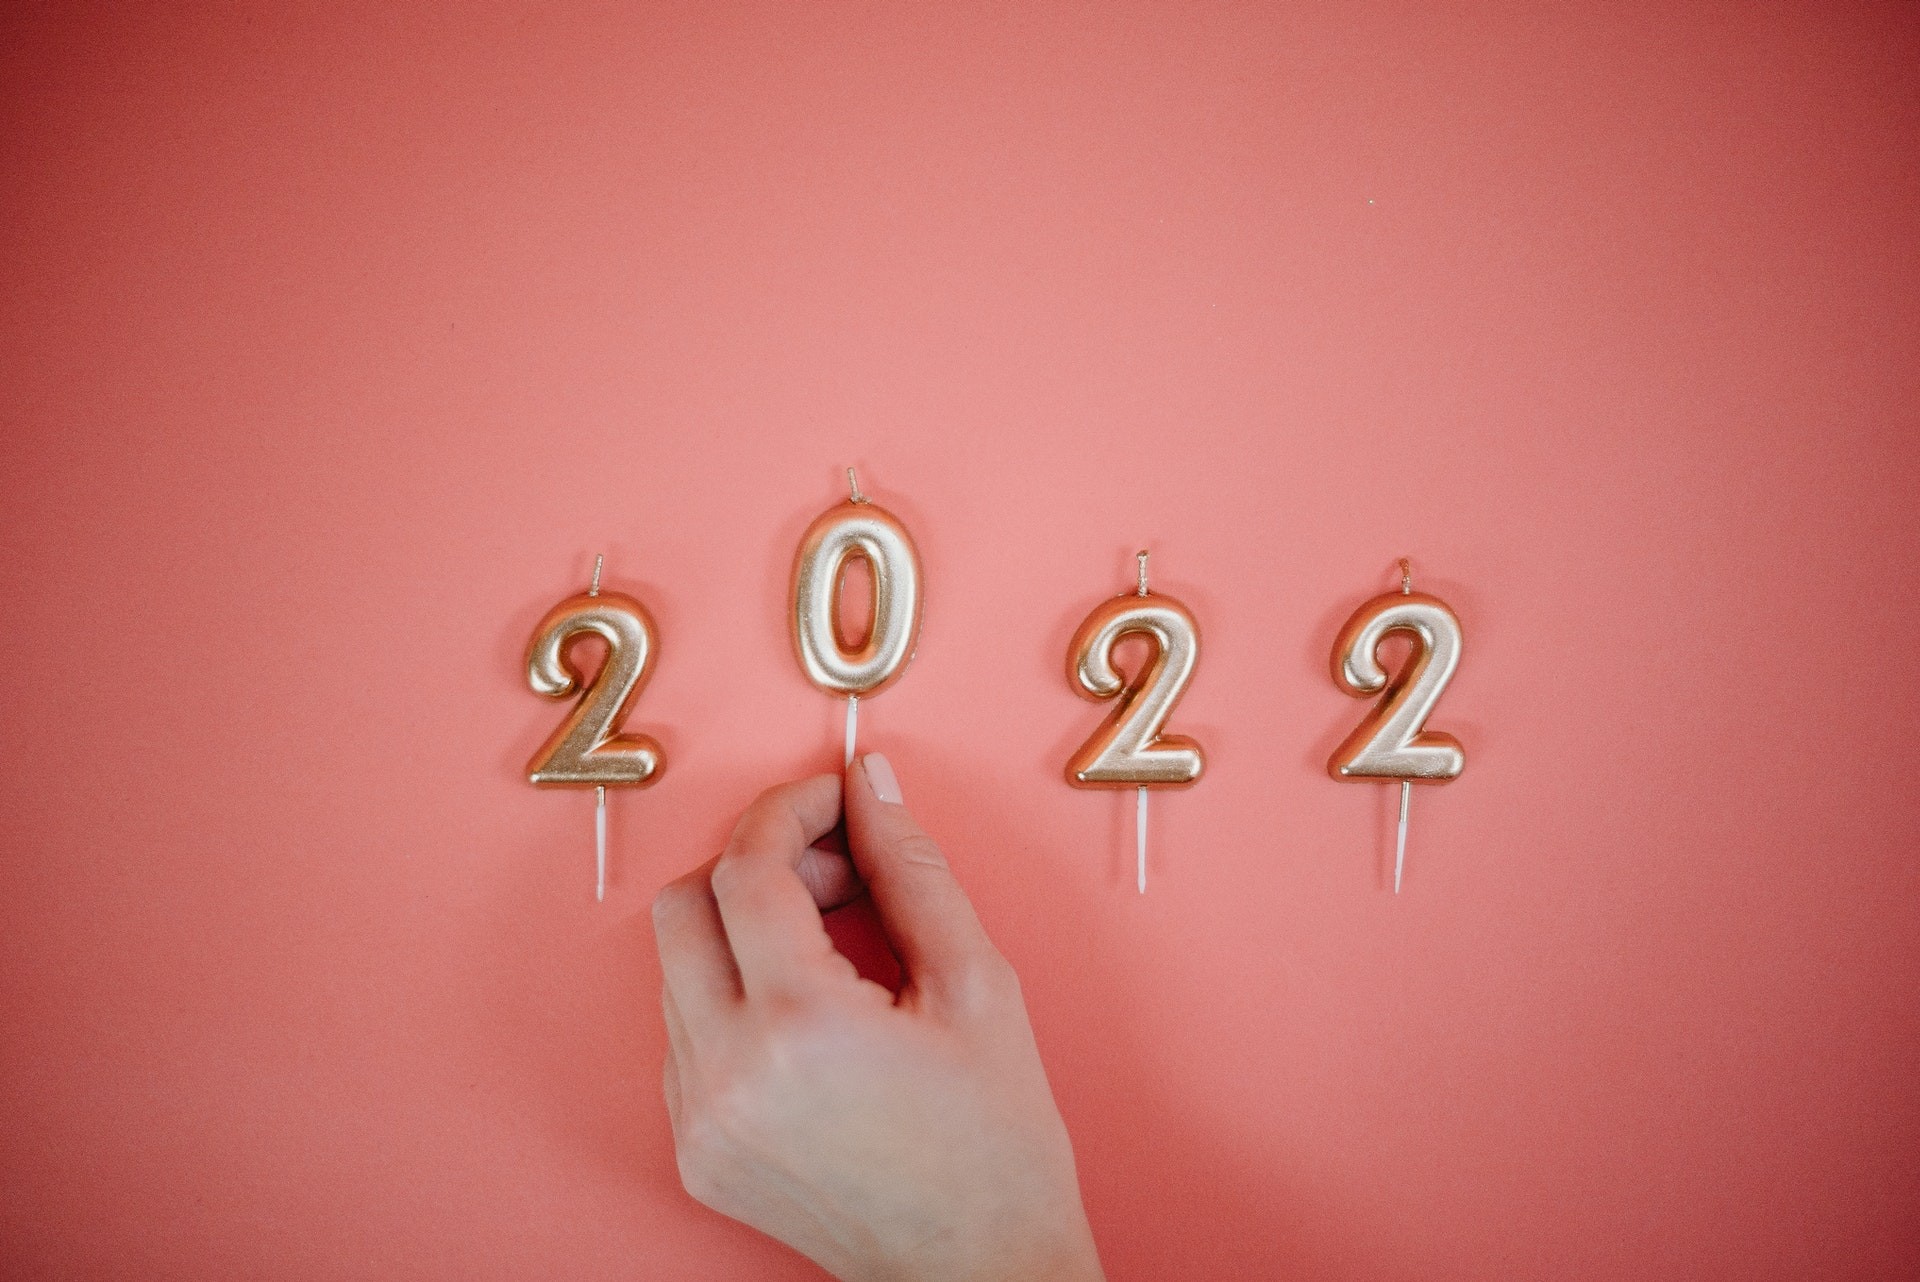 Wallpapers new year 2022 hand 2022 on the desktop